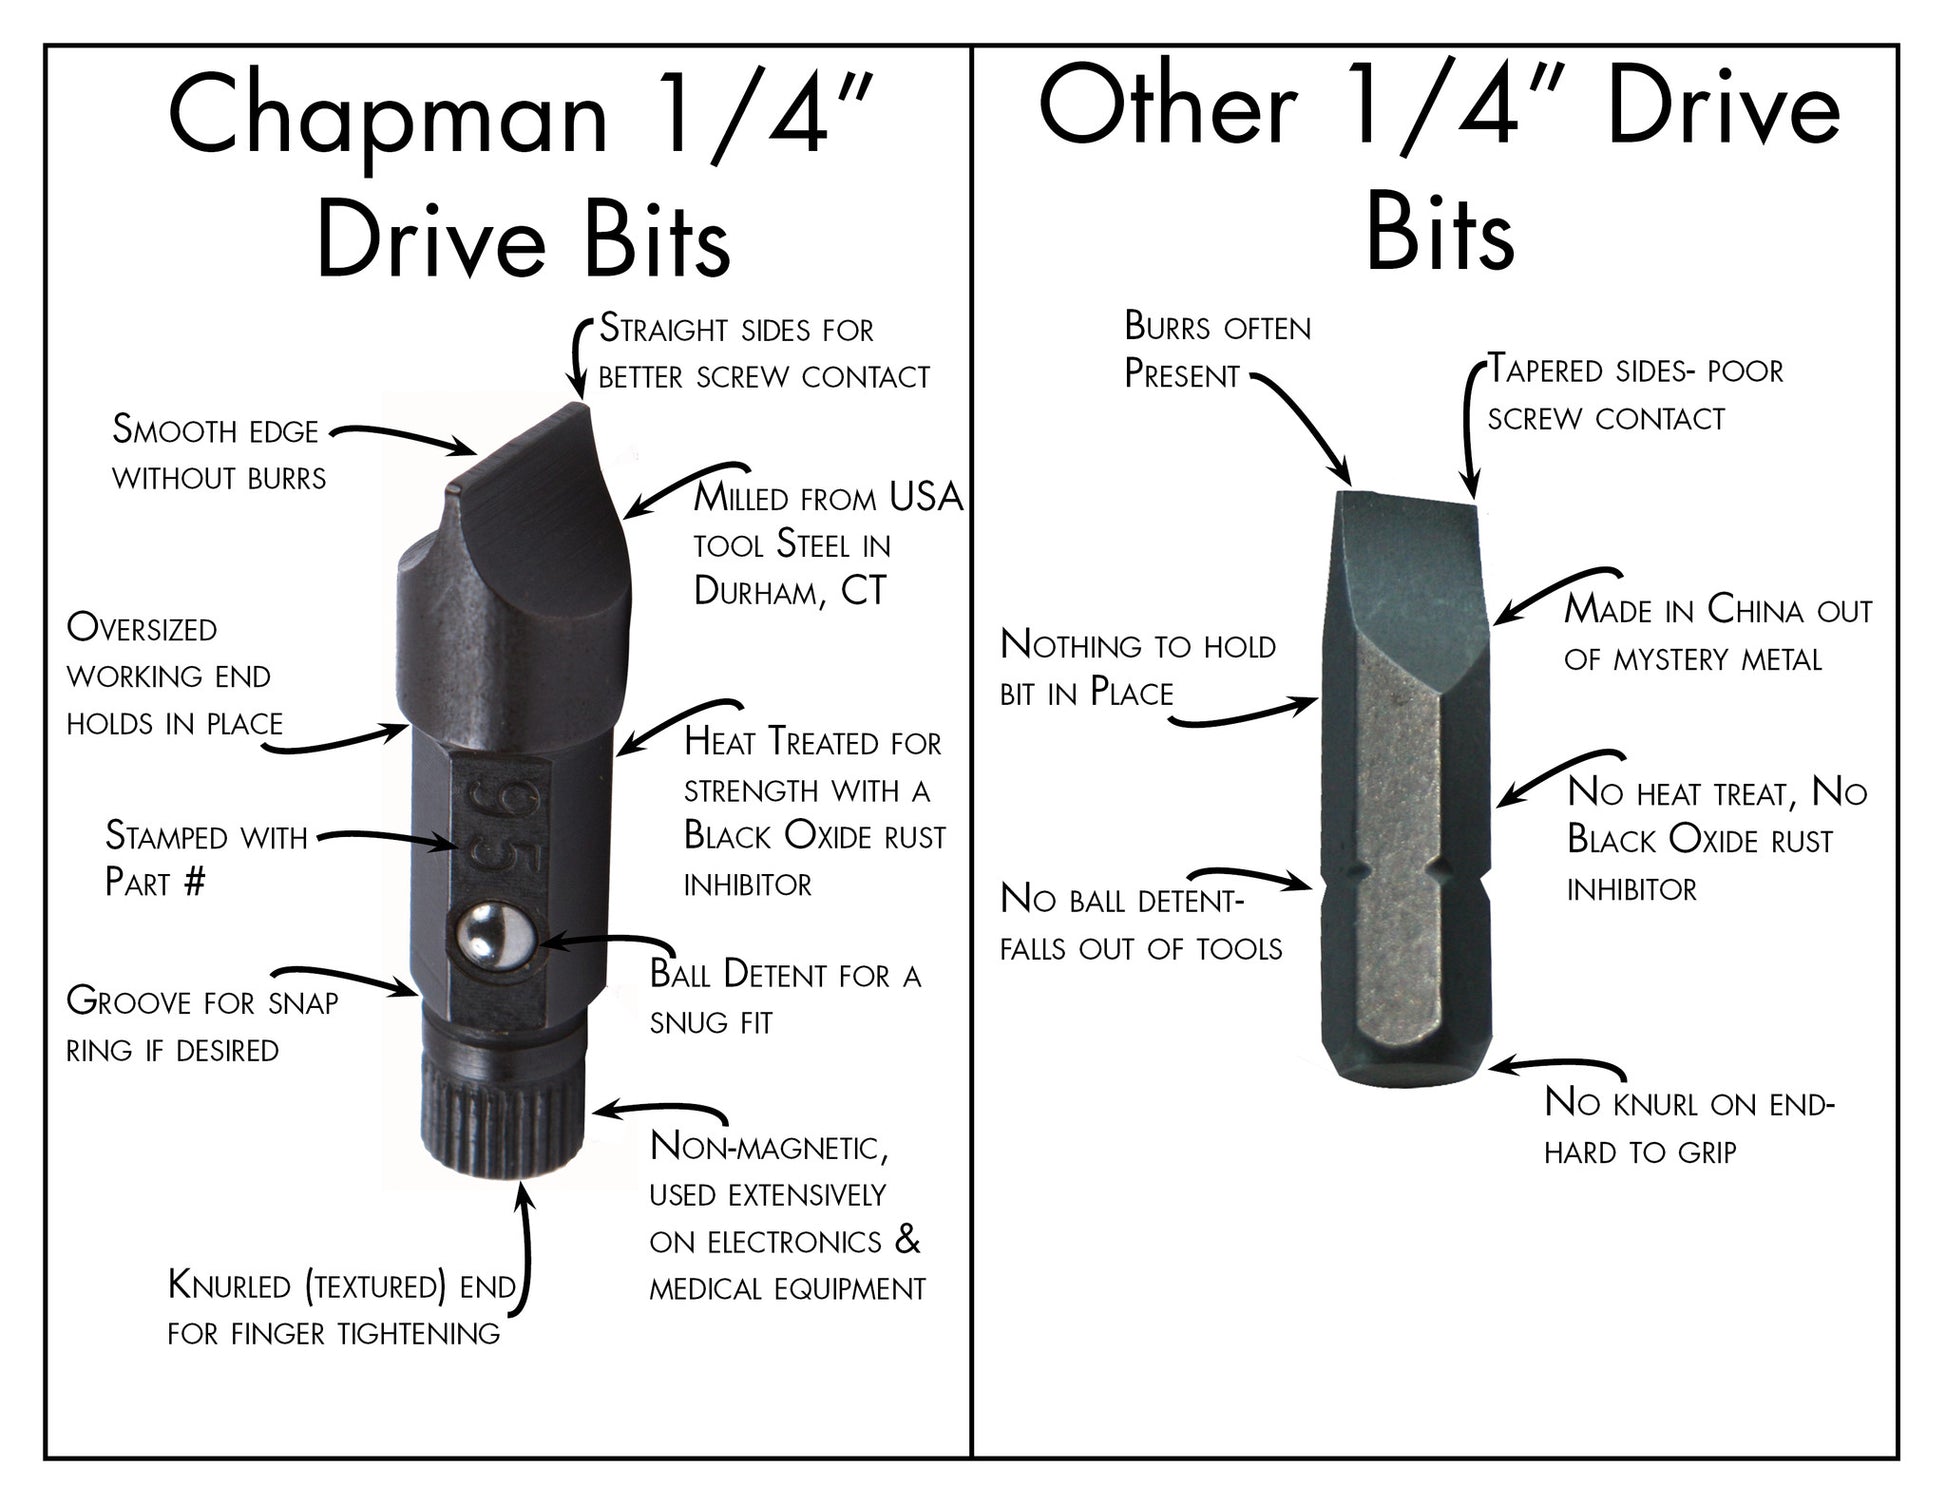 Chapman 1/4" Drive Bits Milled From USA Tool Steel In Durham, CT Compared To Other 1/4" Drive Bits Made in China Out Of Mystery Metal.